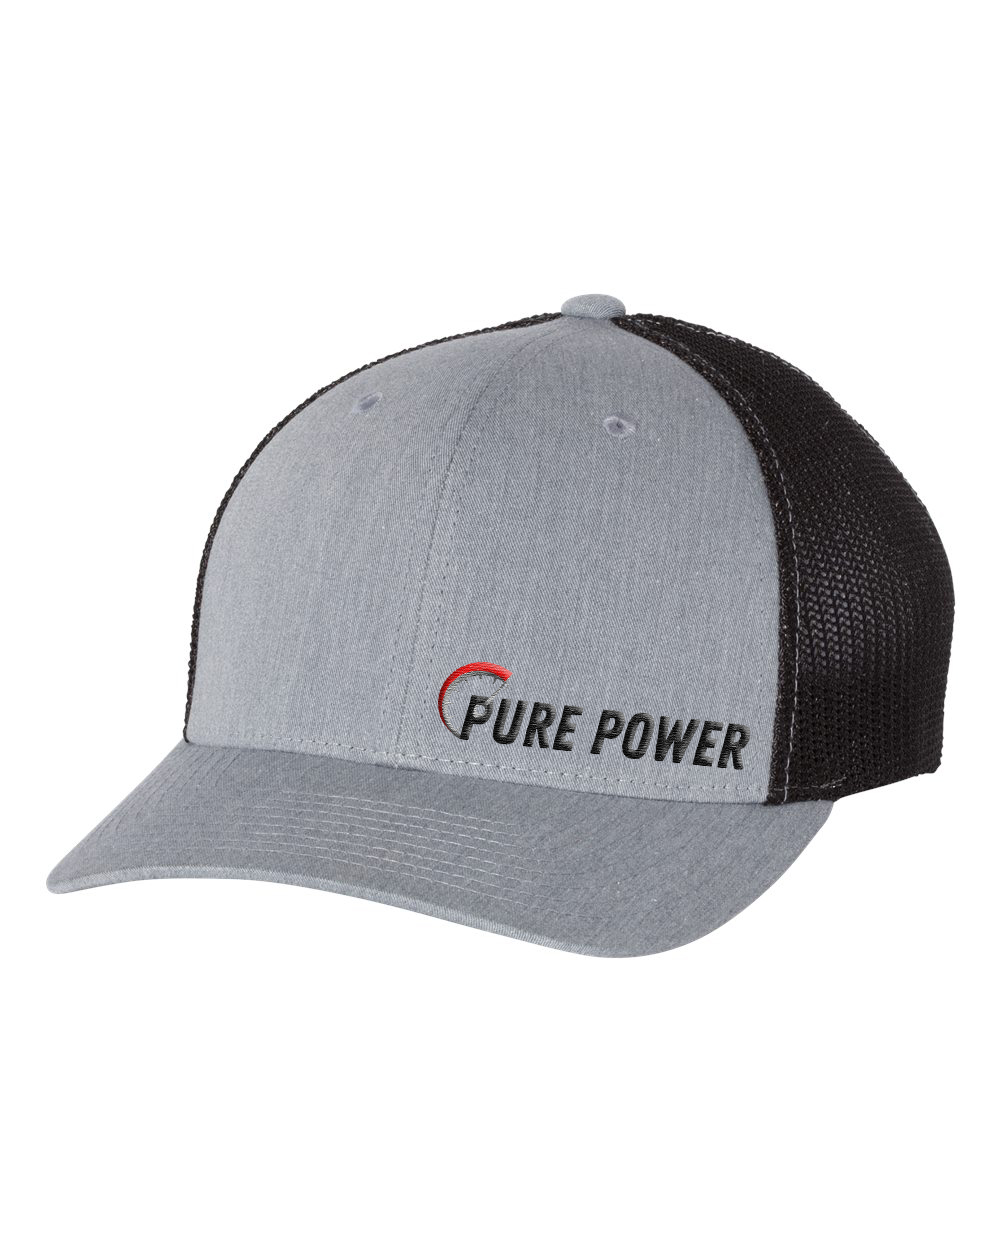 Ride Pure Power Logo Night Out Pro Embroidered Snapback Trucker Hat Heather Gray/Black